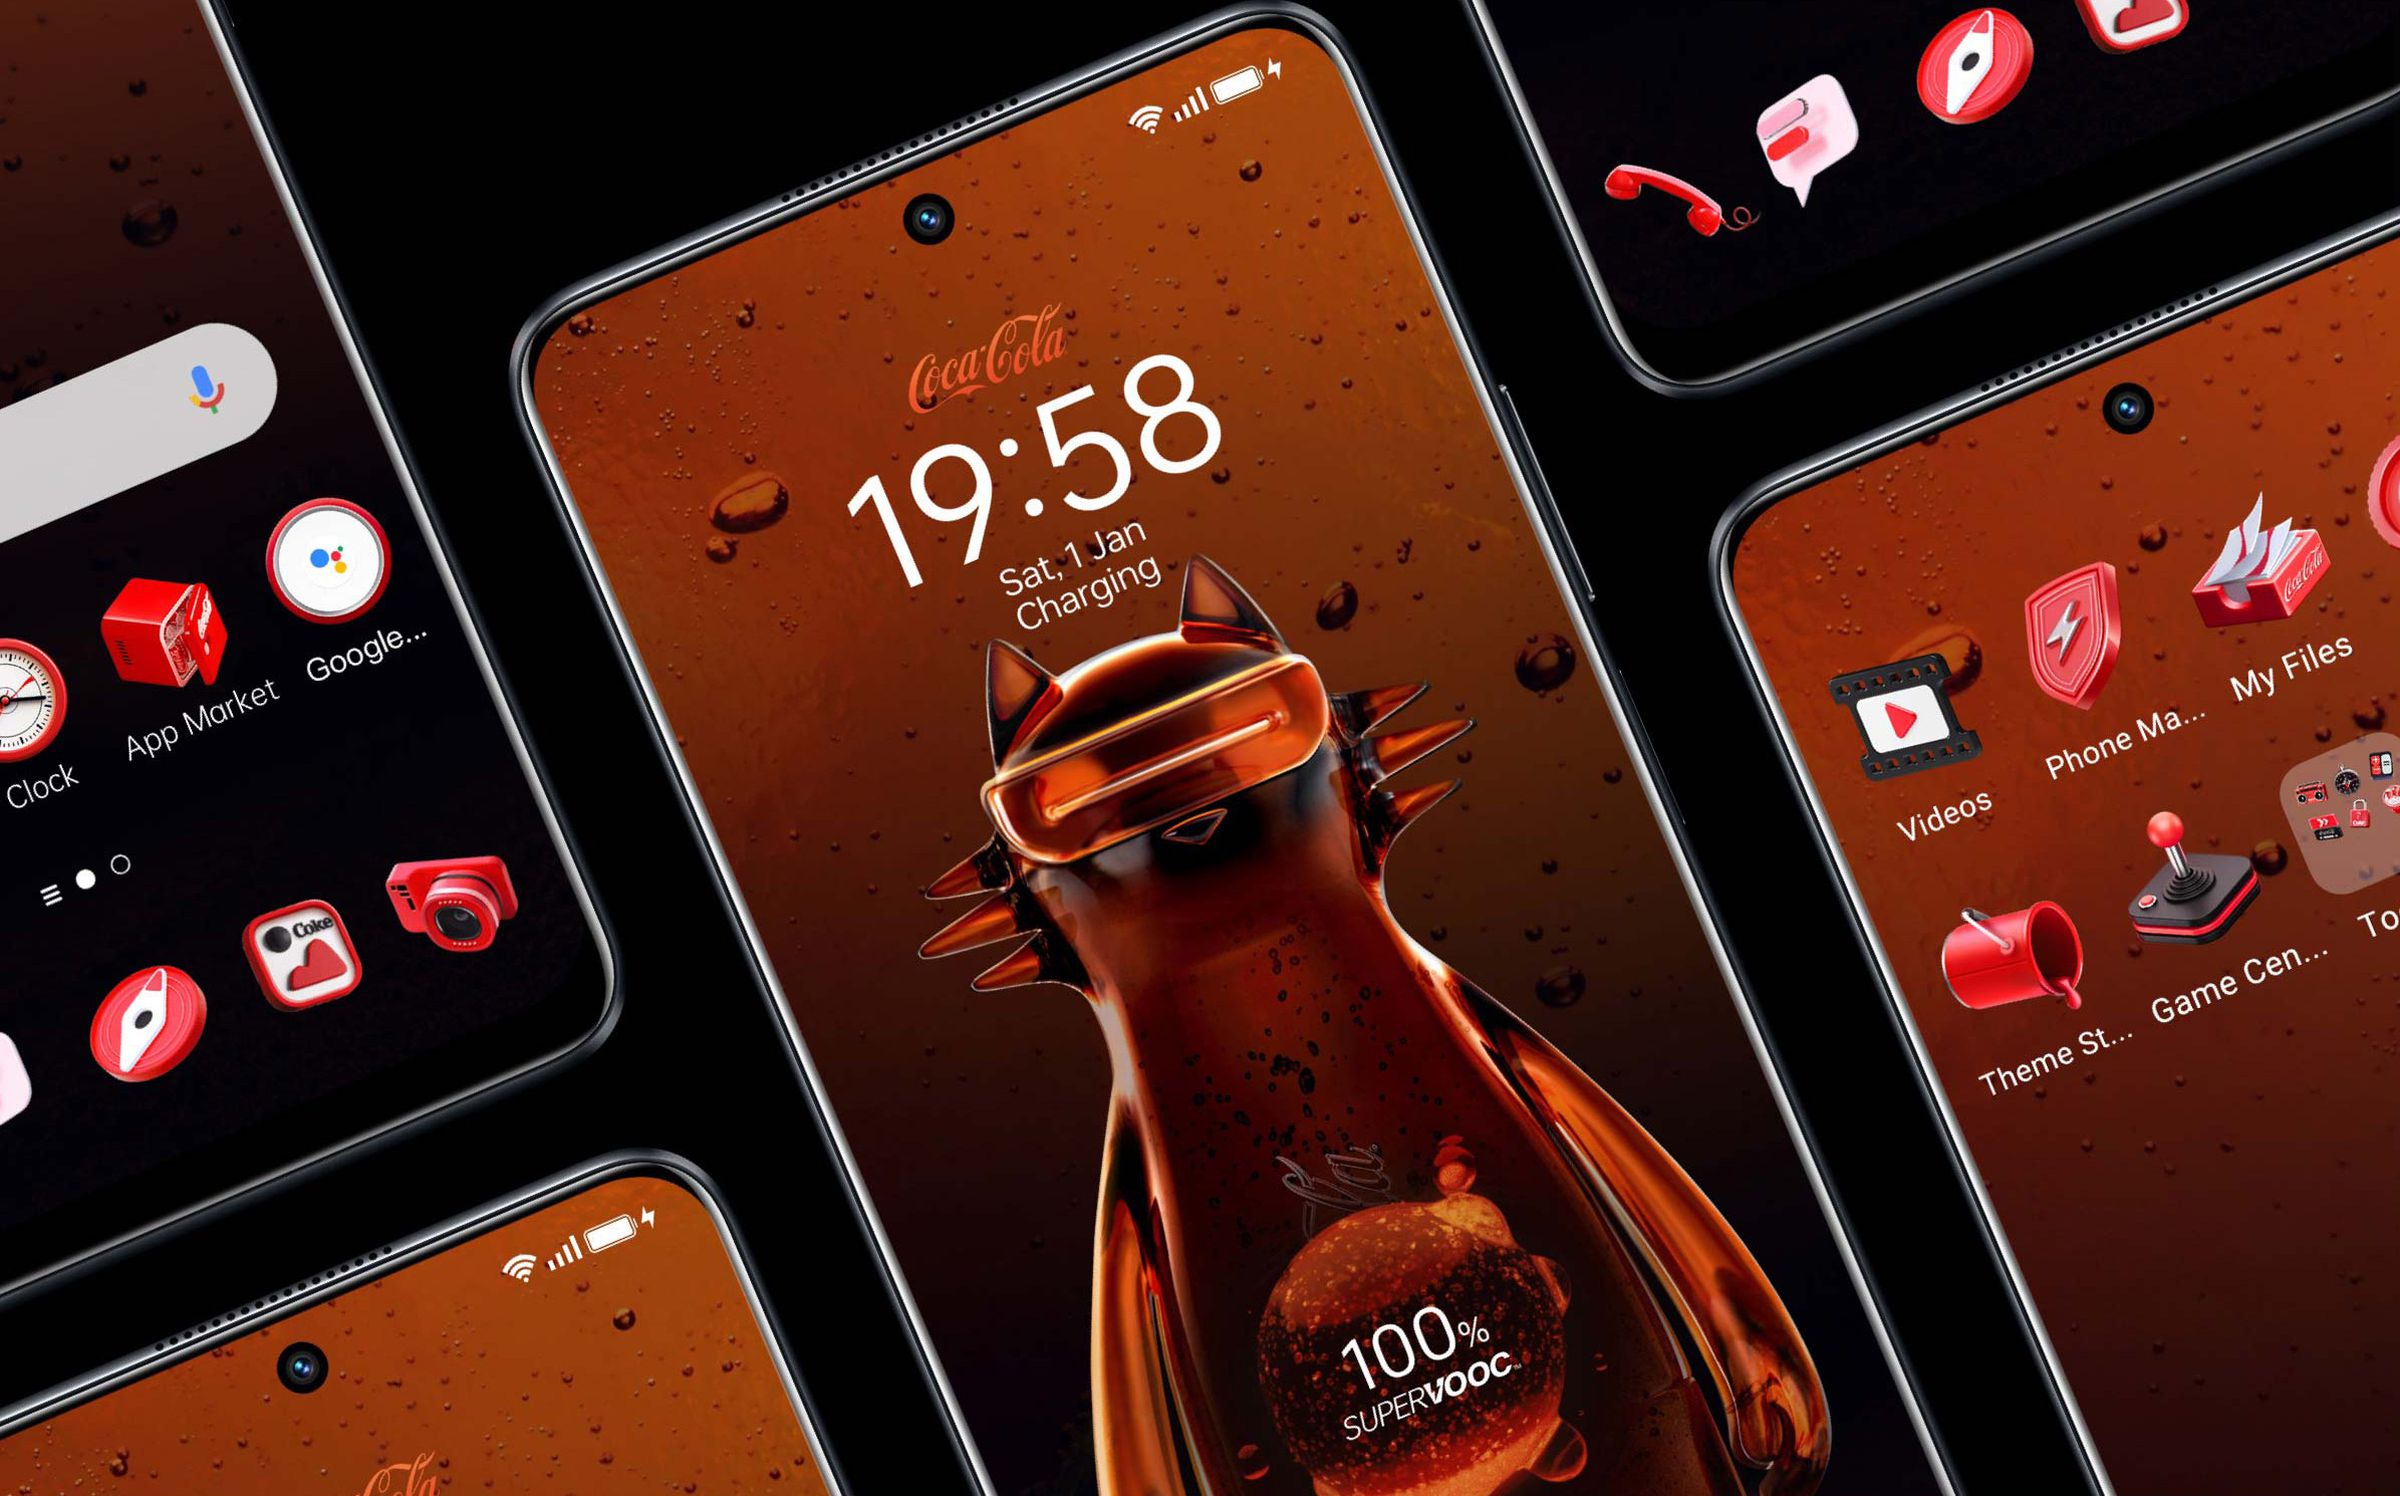 Graphic showing Coke-themed lock screen, app icons, and charging animation.